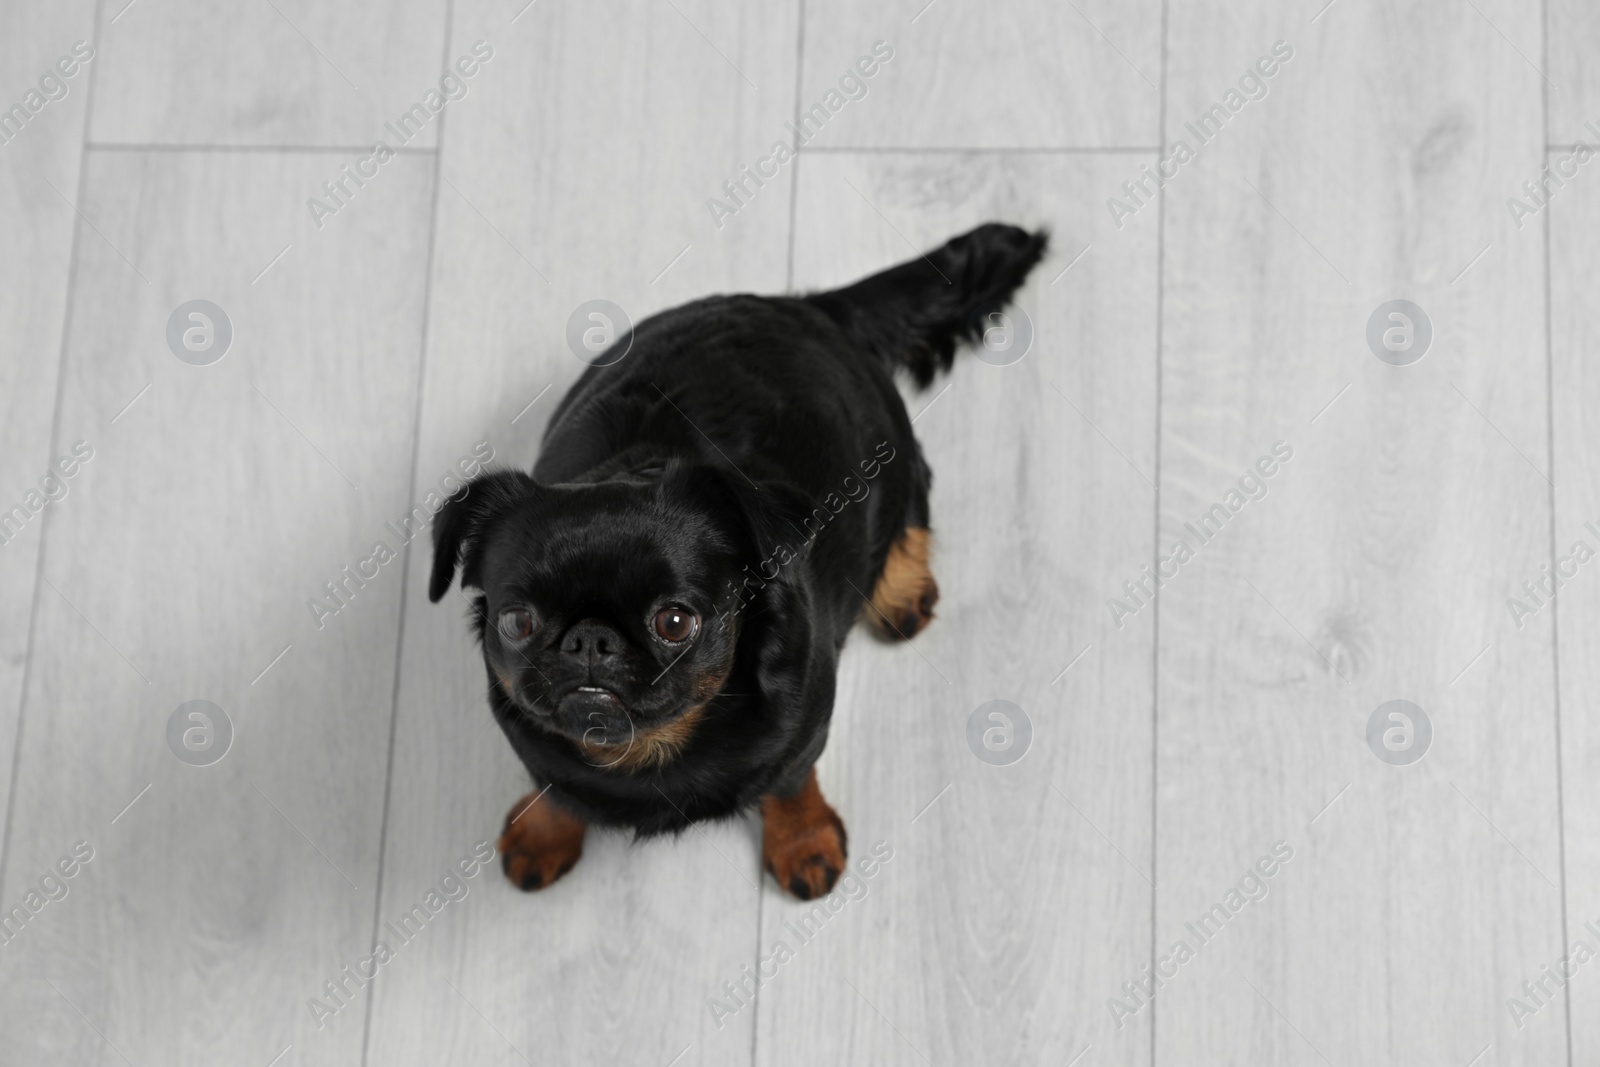 Photo of Adorable black Petit Brabancon dog sitting on wooden floor, above view